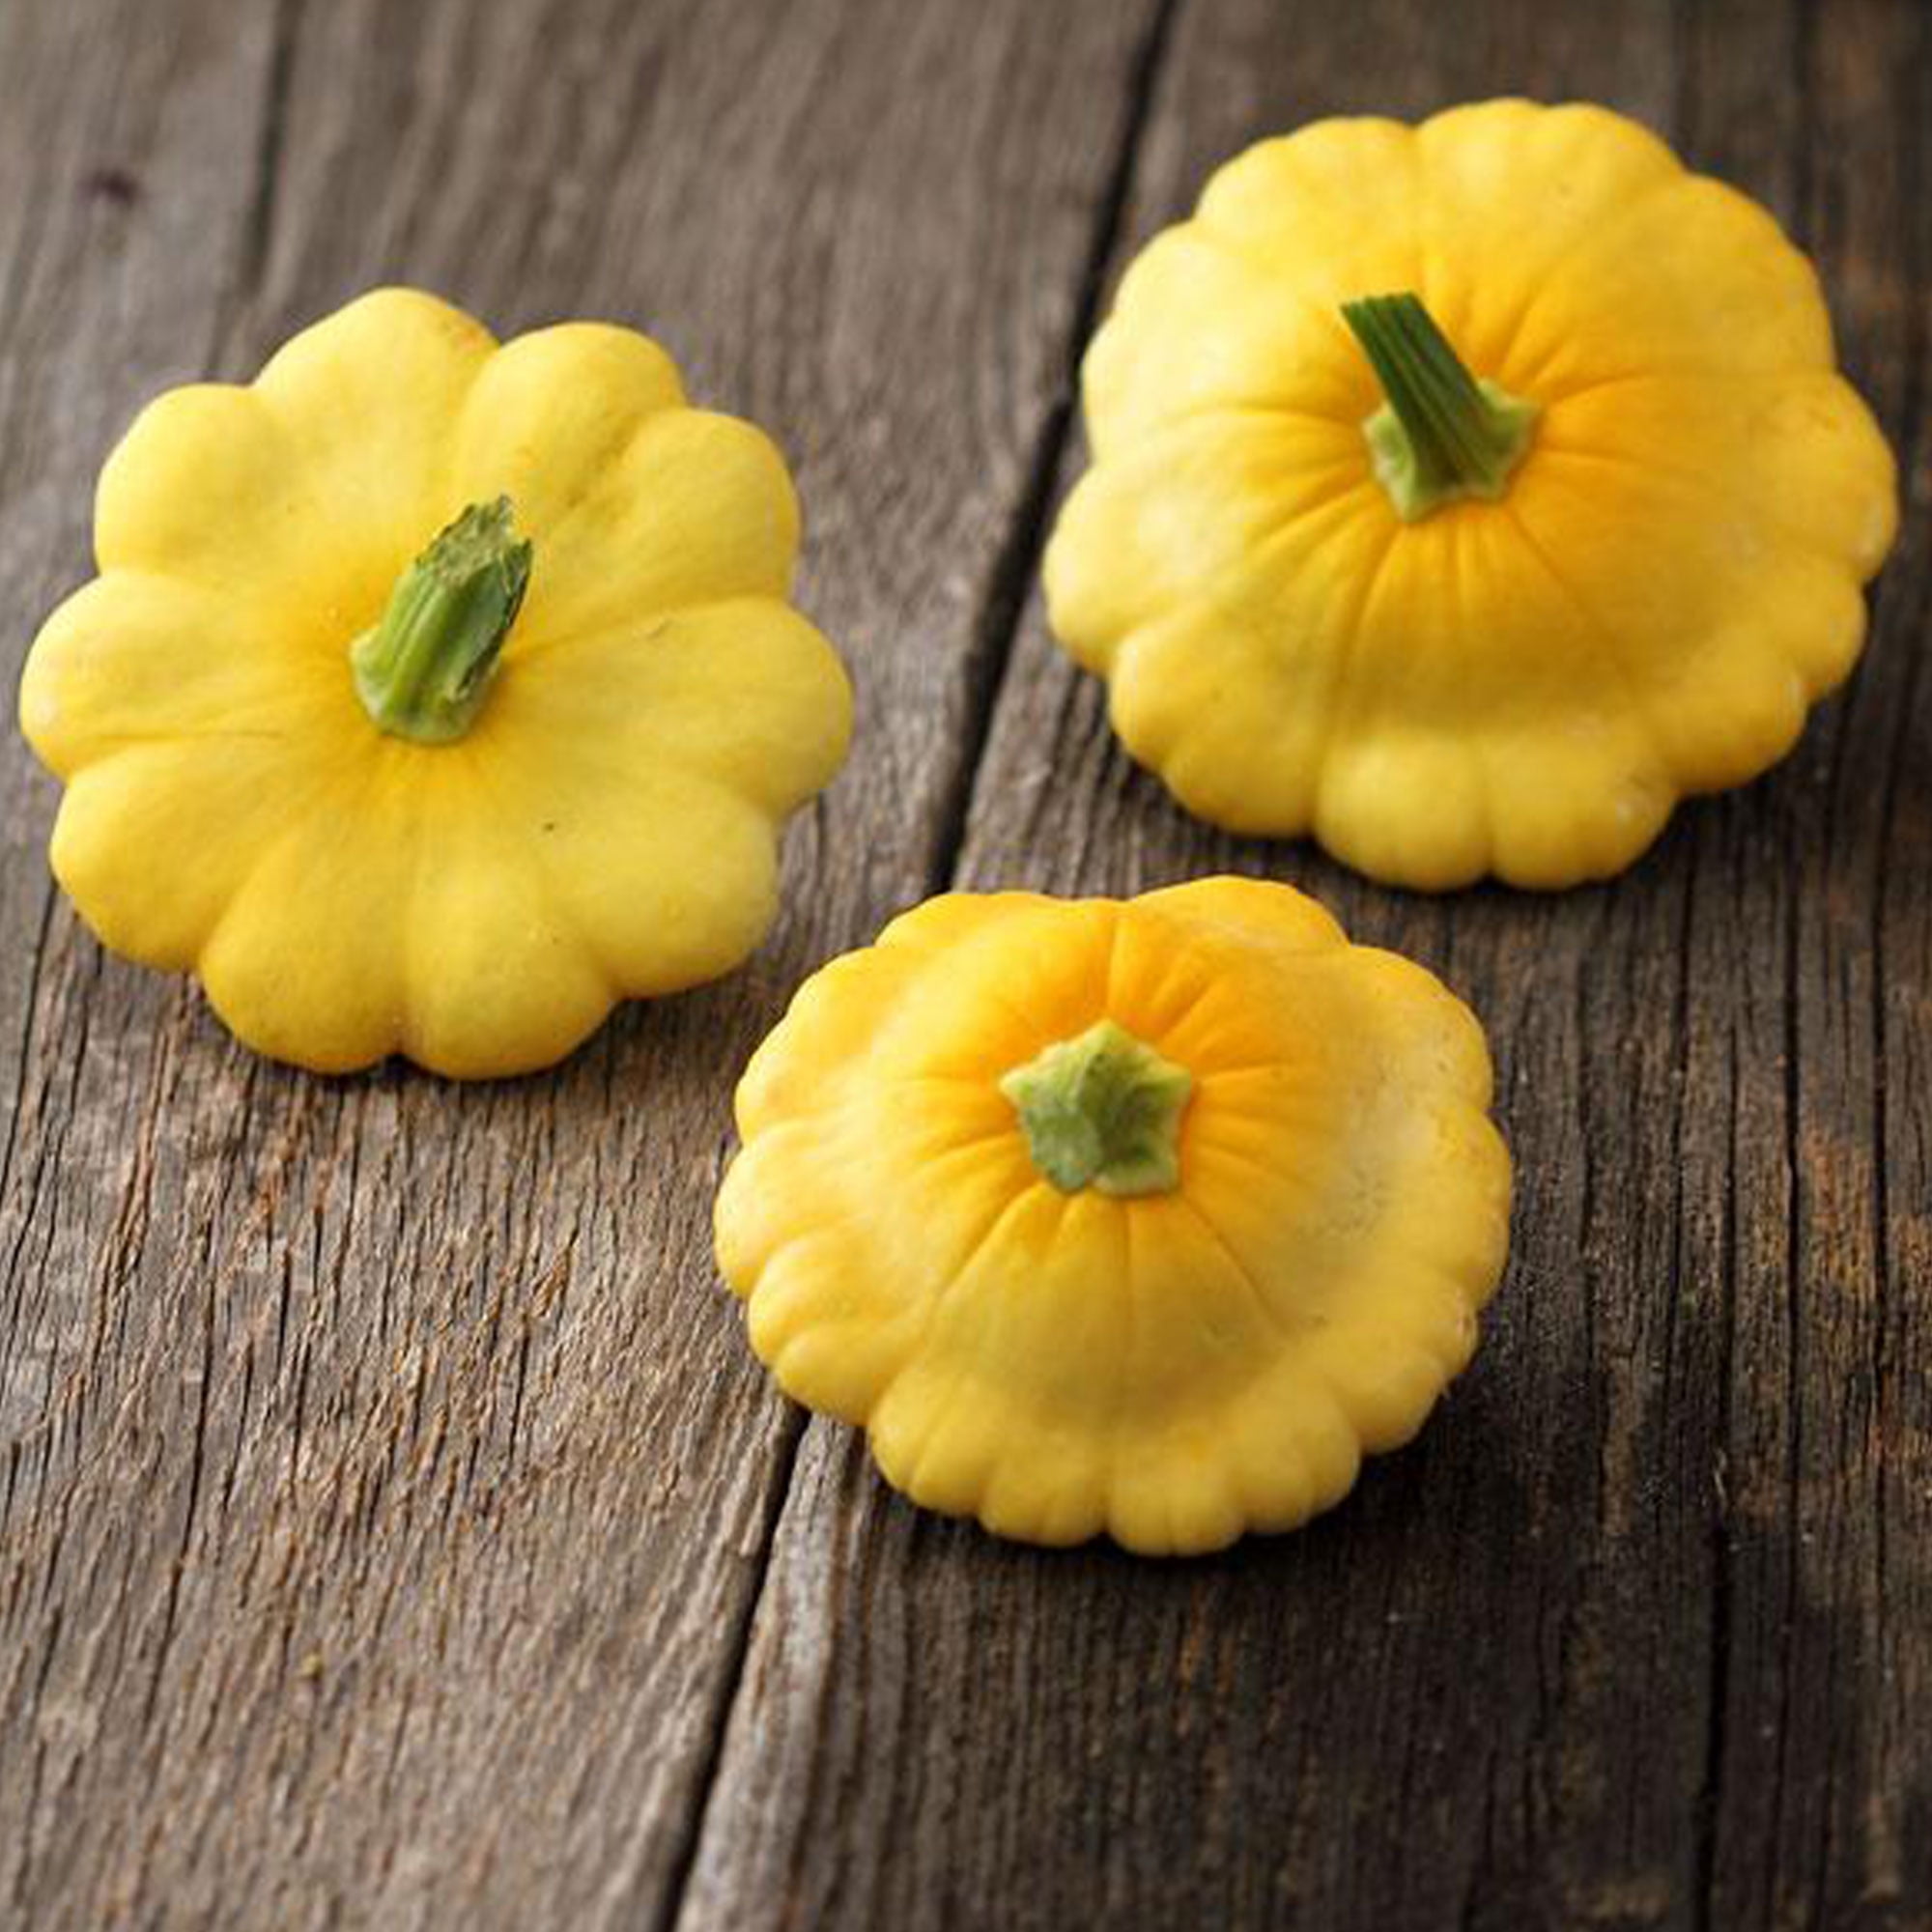 Scallop Yellow Bush Squash Seed - 4 g ~55 Seeds - Heirloom, Open ...